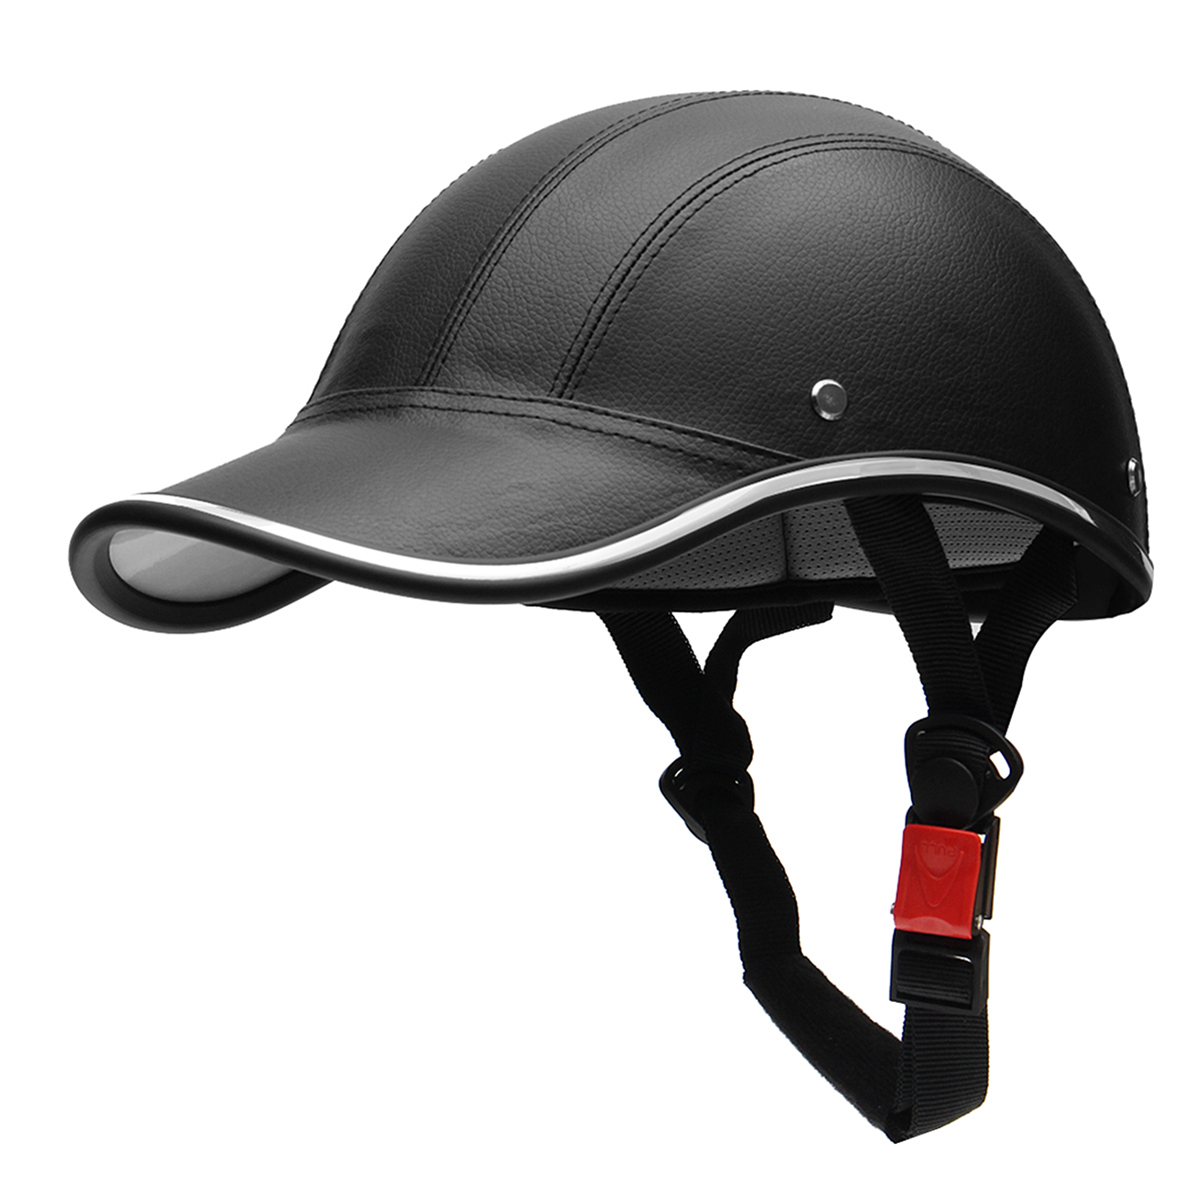 Adjustable Baseball Cap Hat Safety Helmet for Riding Cycling Bicycle Motorcycles 